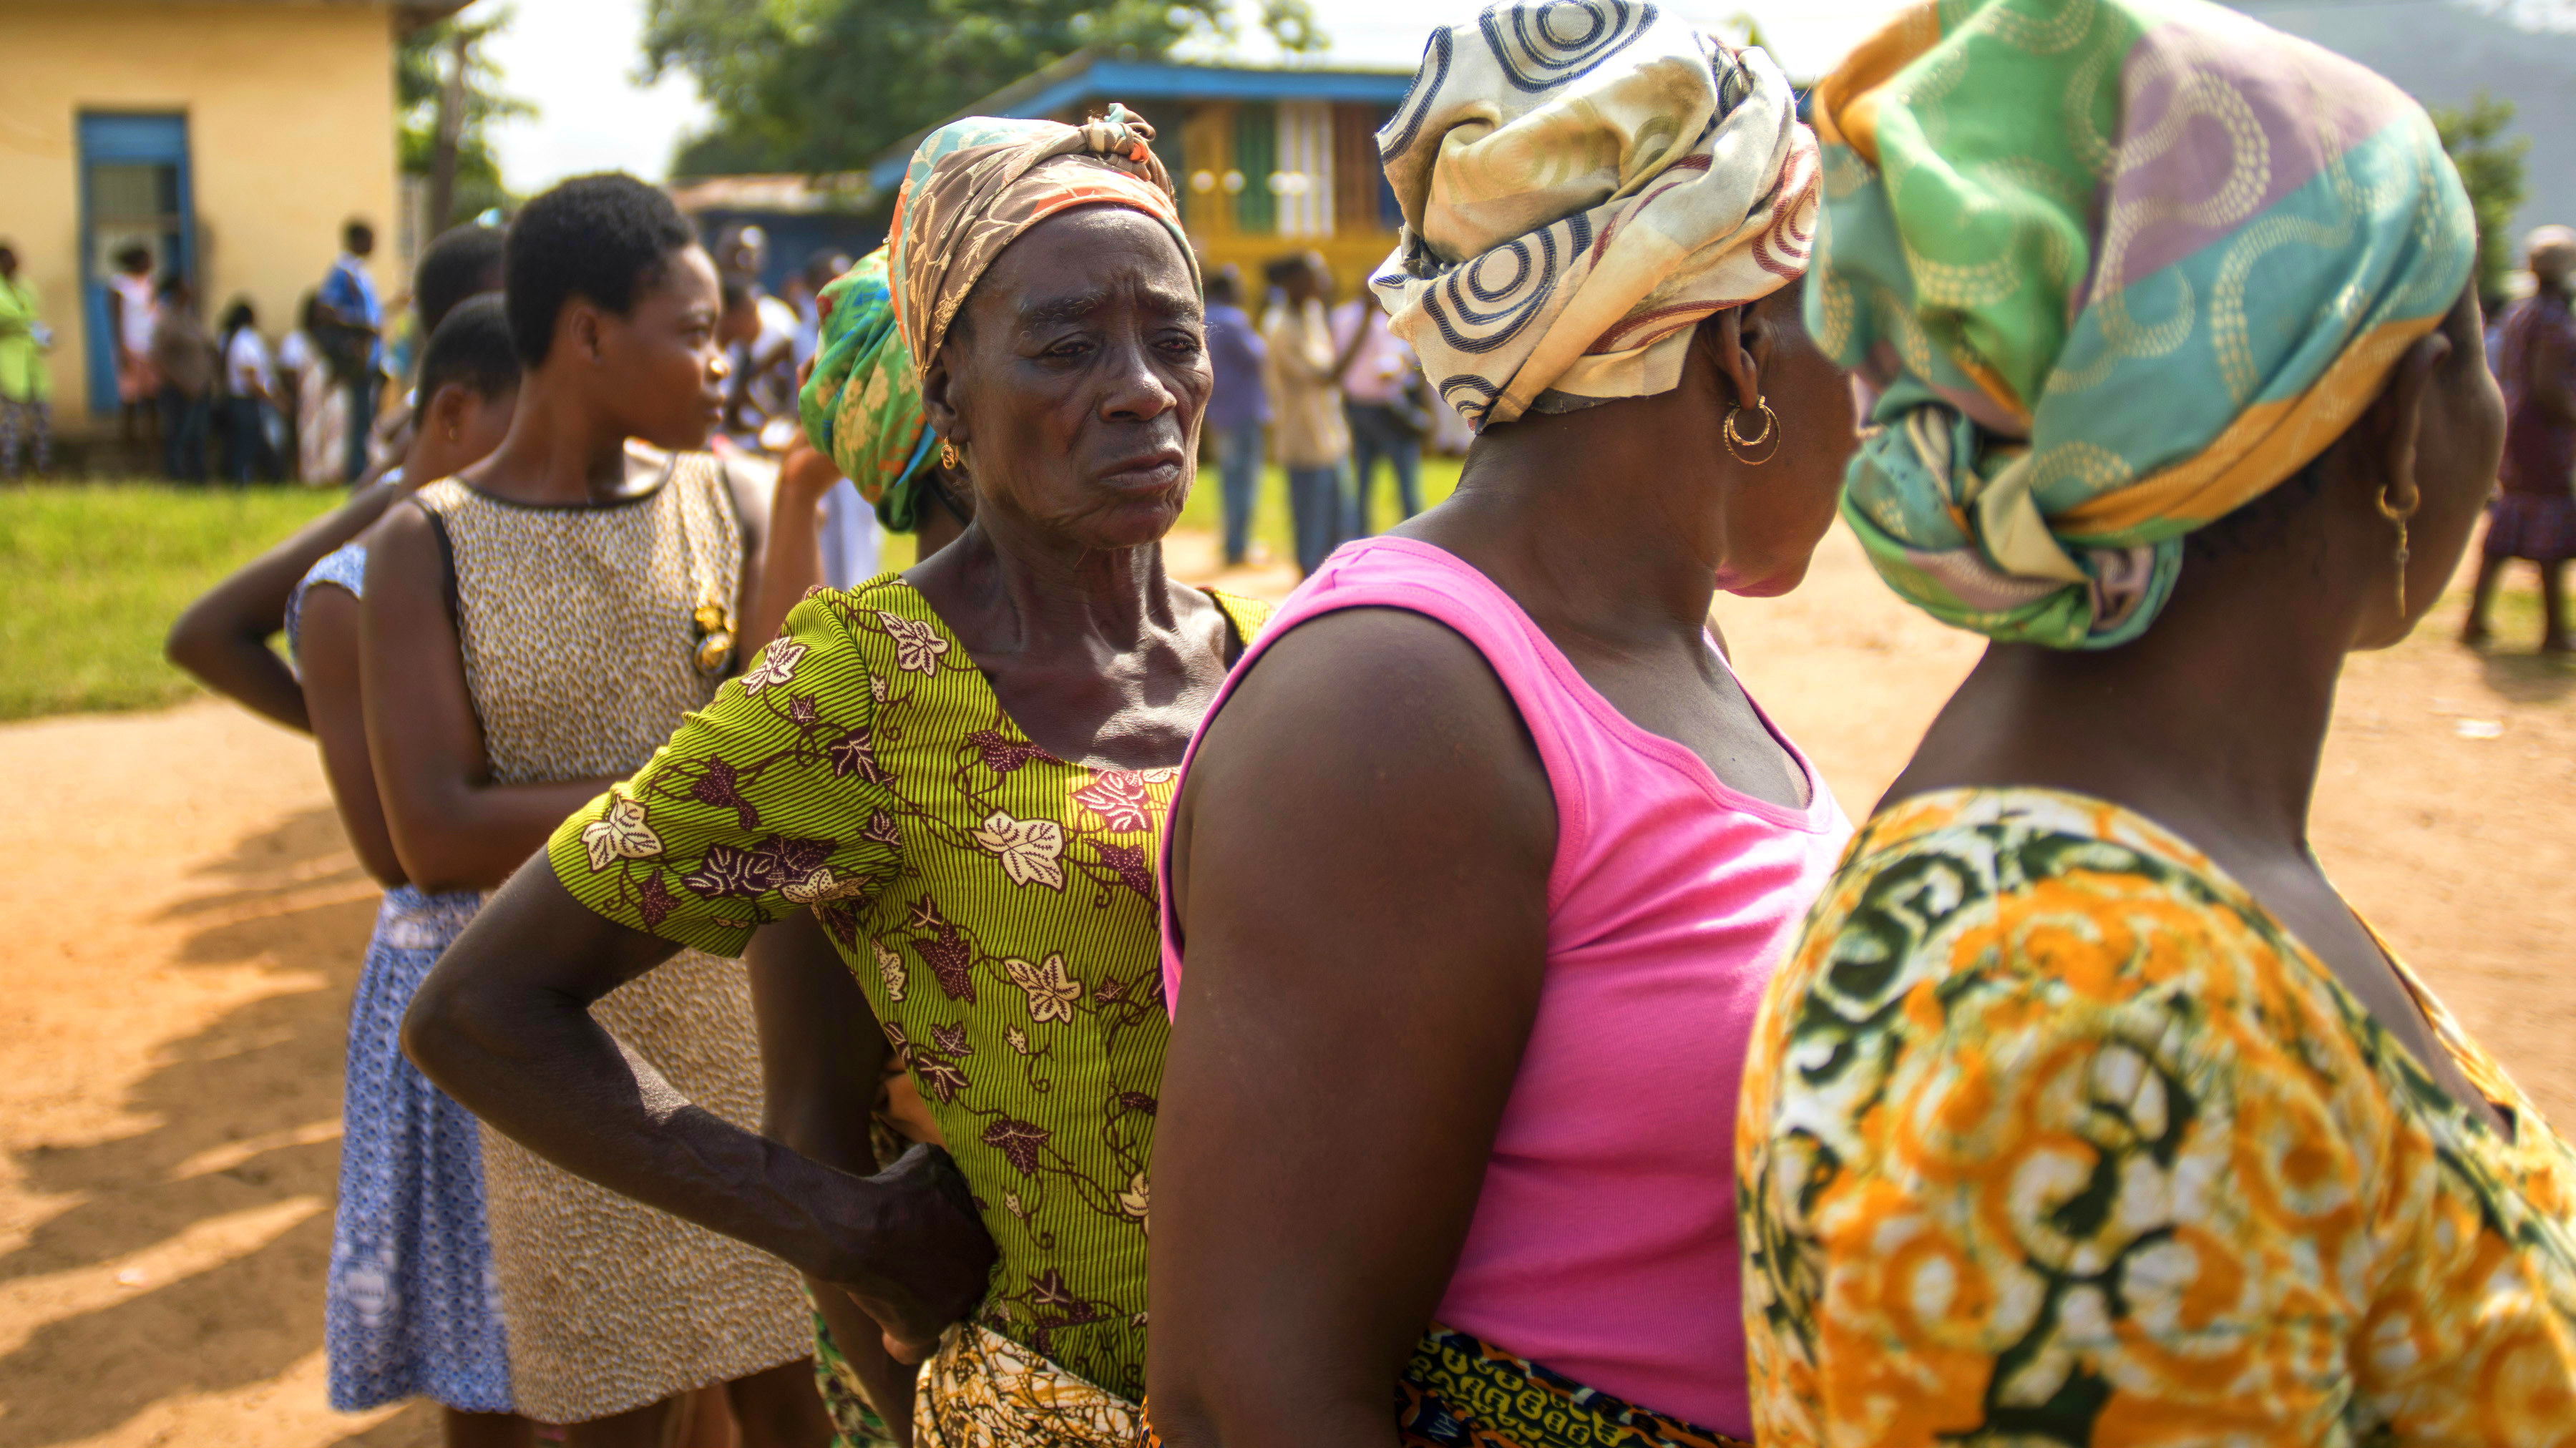 Women queue to vote outside a polling station in Ghana